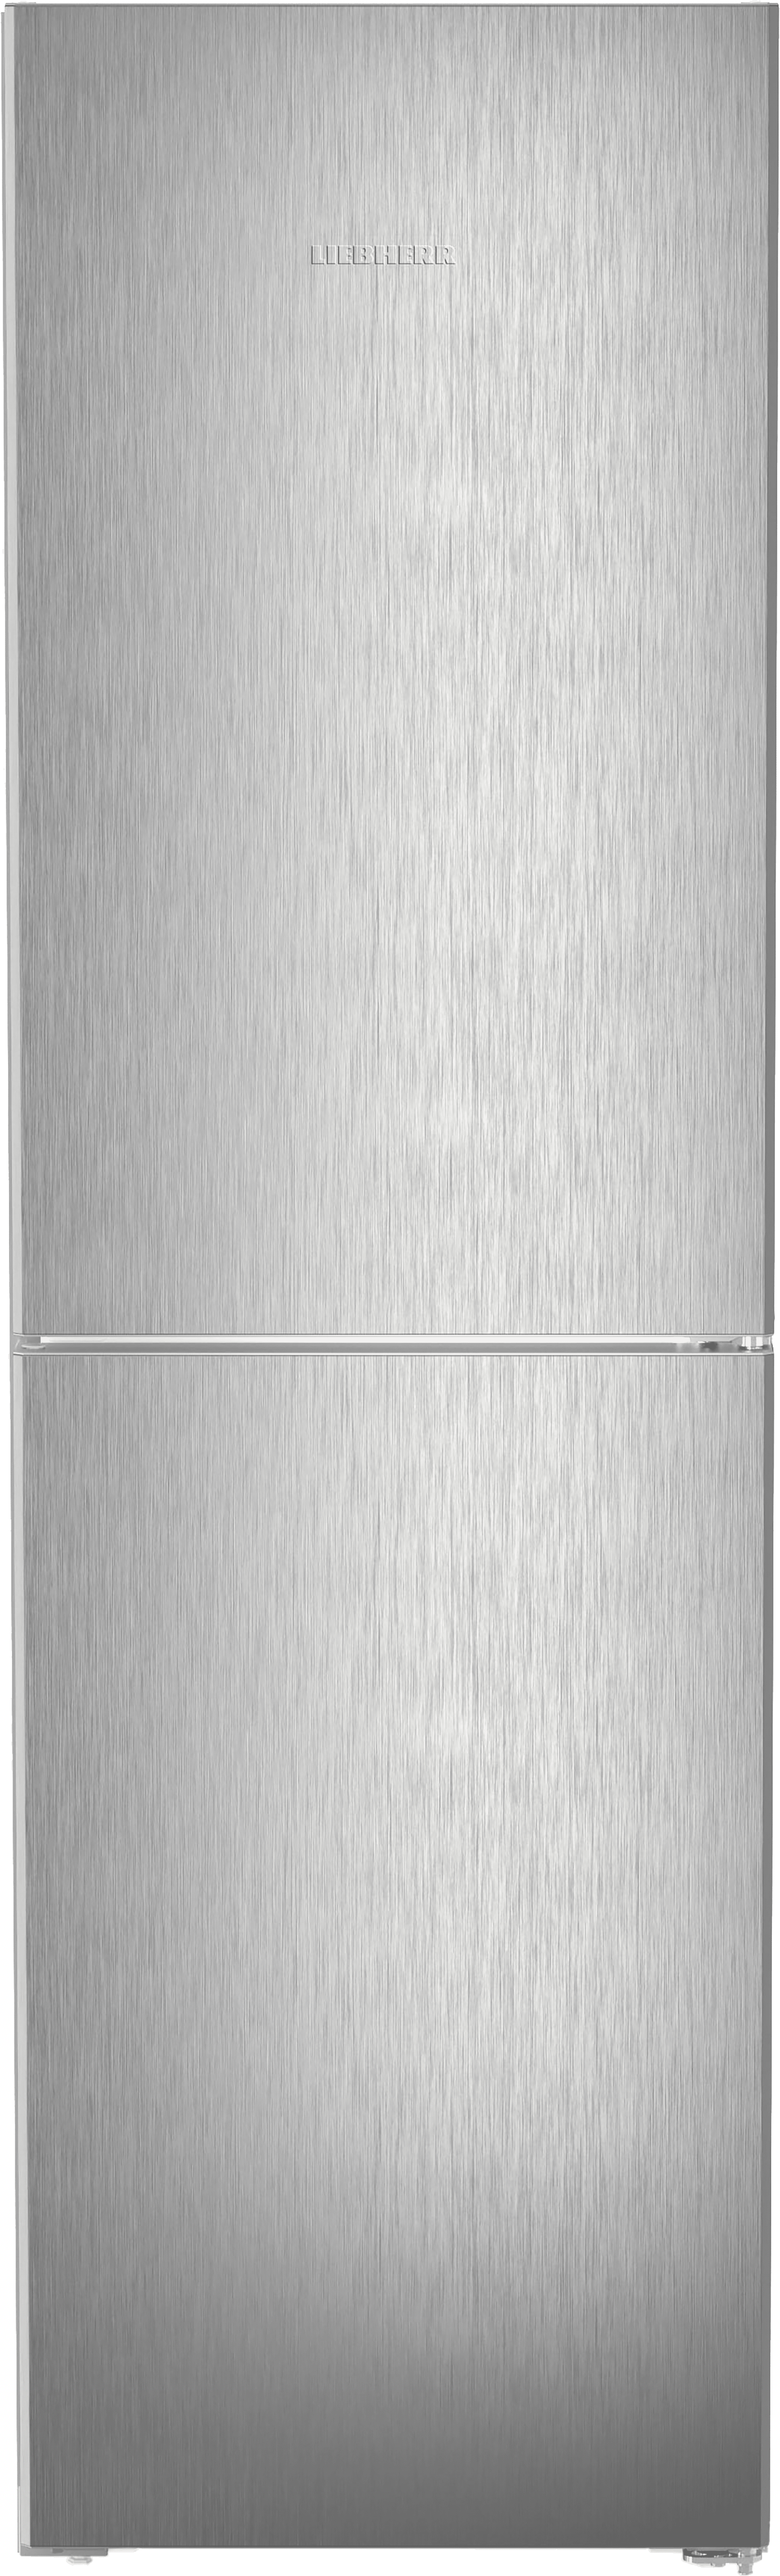 Liebherr CNsfd5724 50/50 Frost Free Fridge Freezer - Stainless Steel - D Rated, Stainless Steel